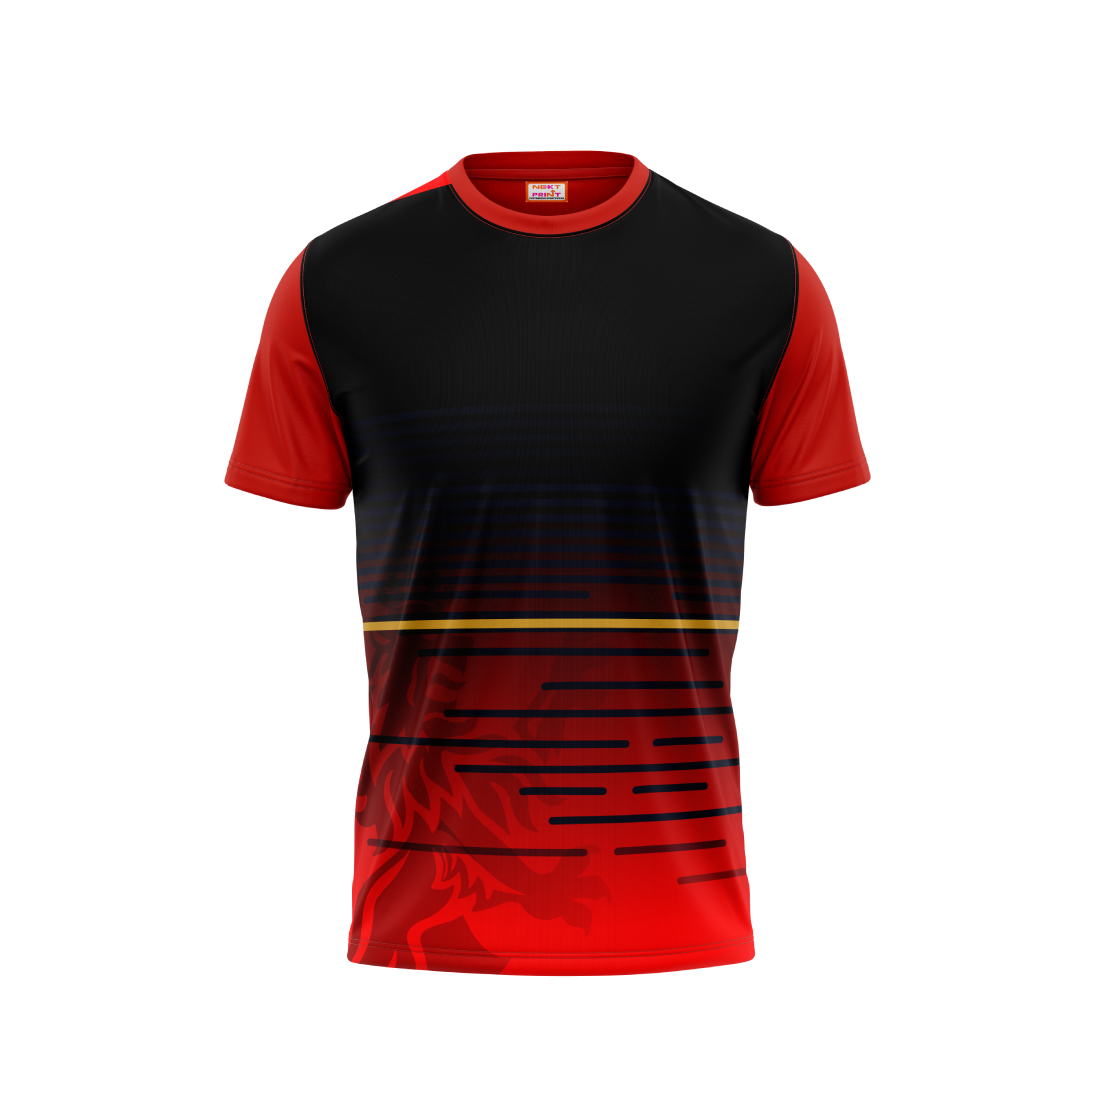 Round Neck Printed Jersey Red NP50000137